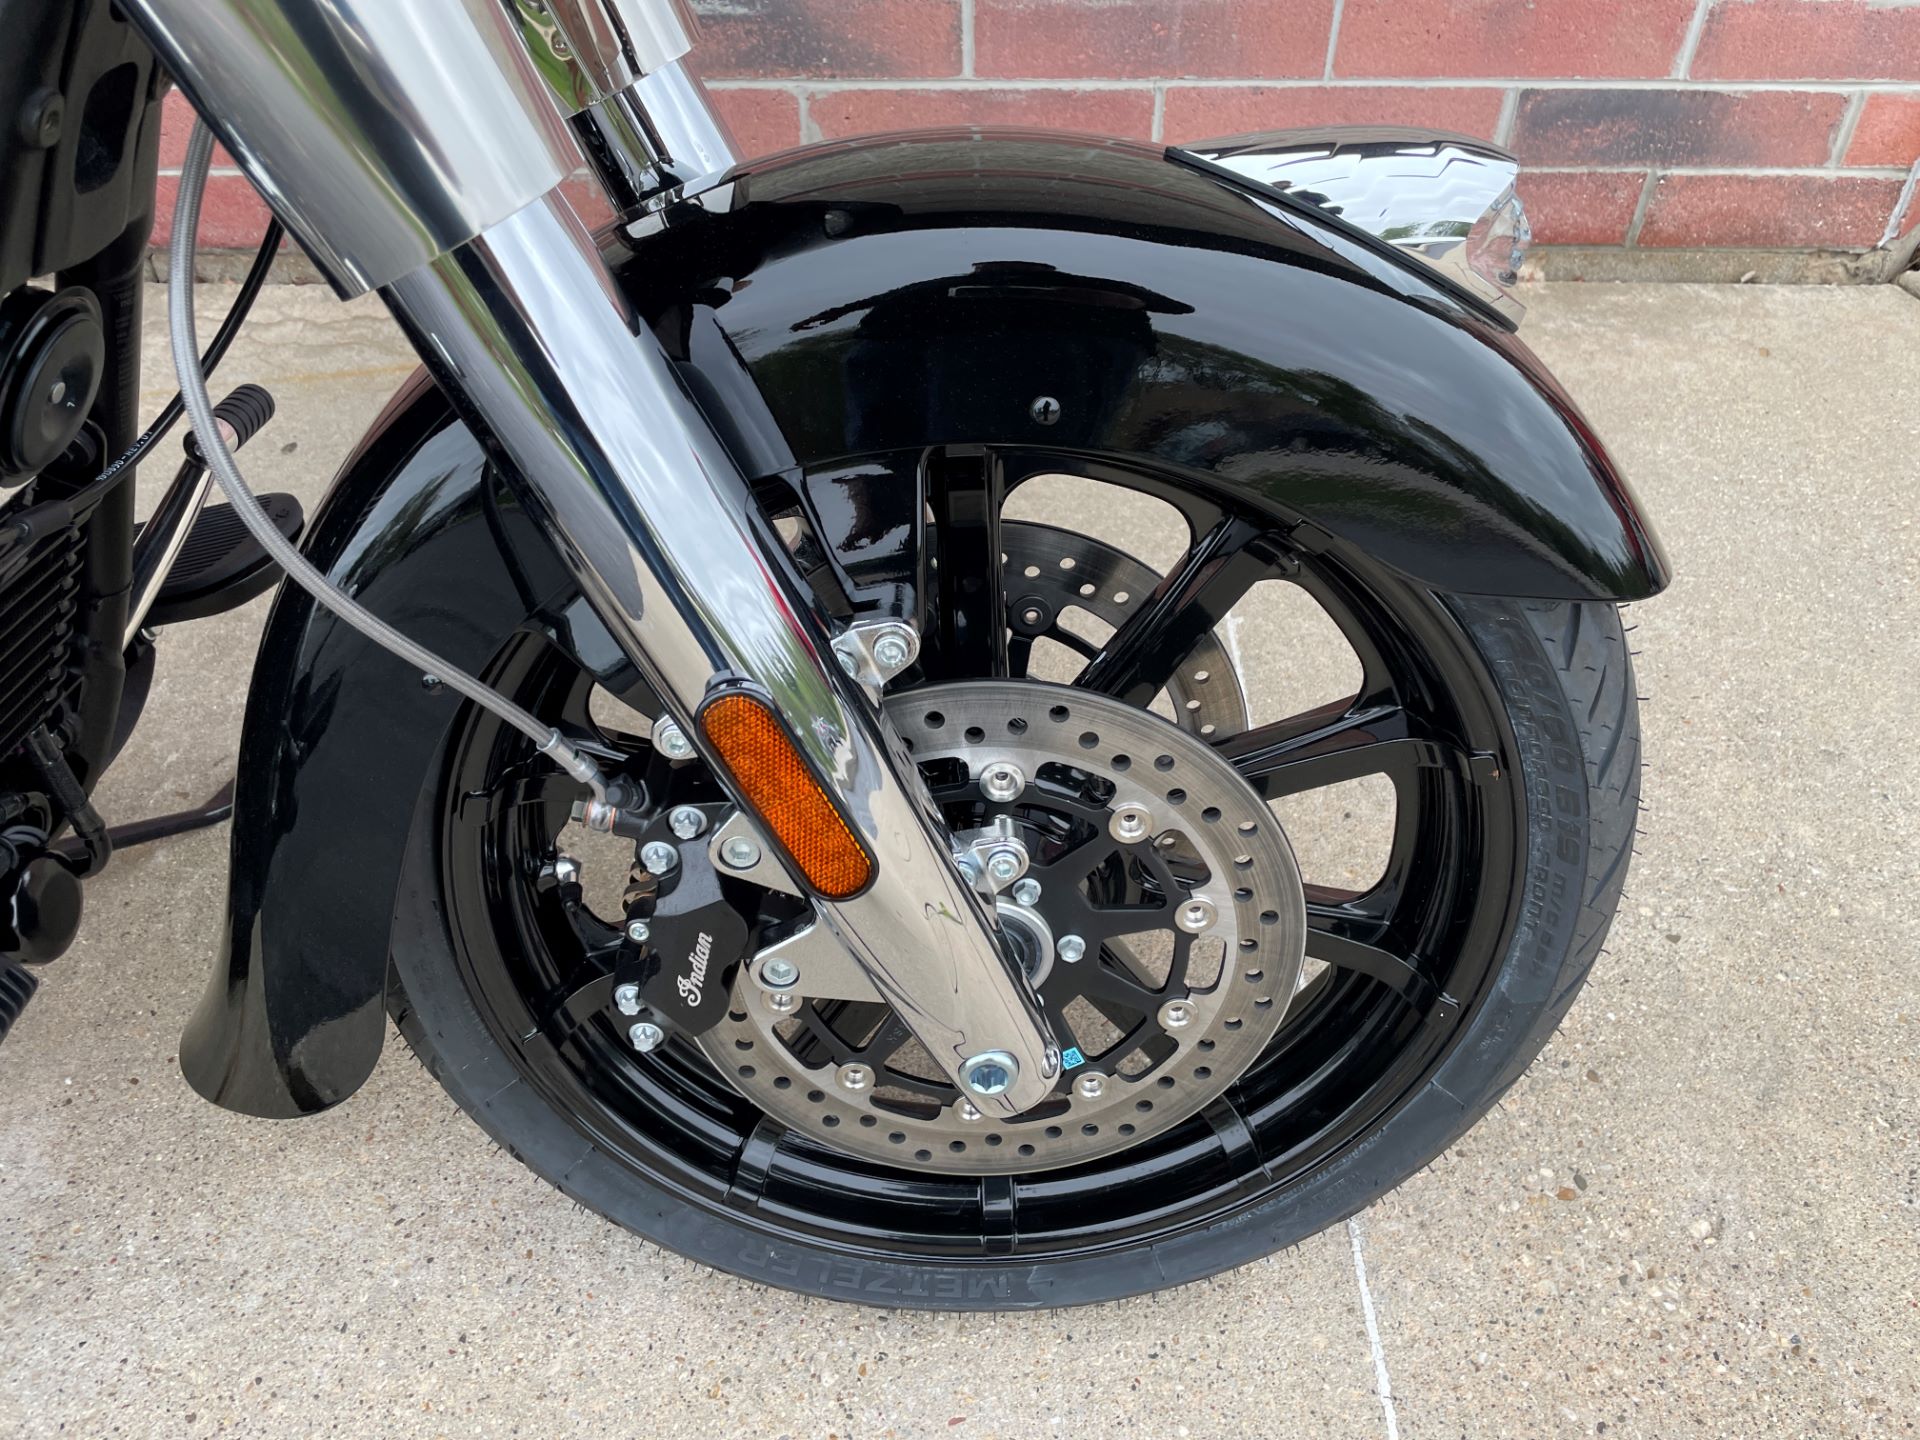 2021 Indian Chieftain® in Muskego, Wisconsin - Photo 4